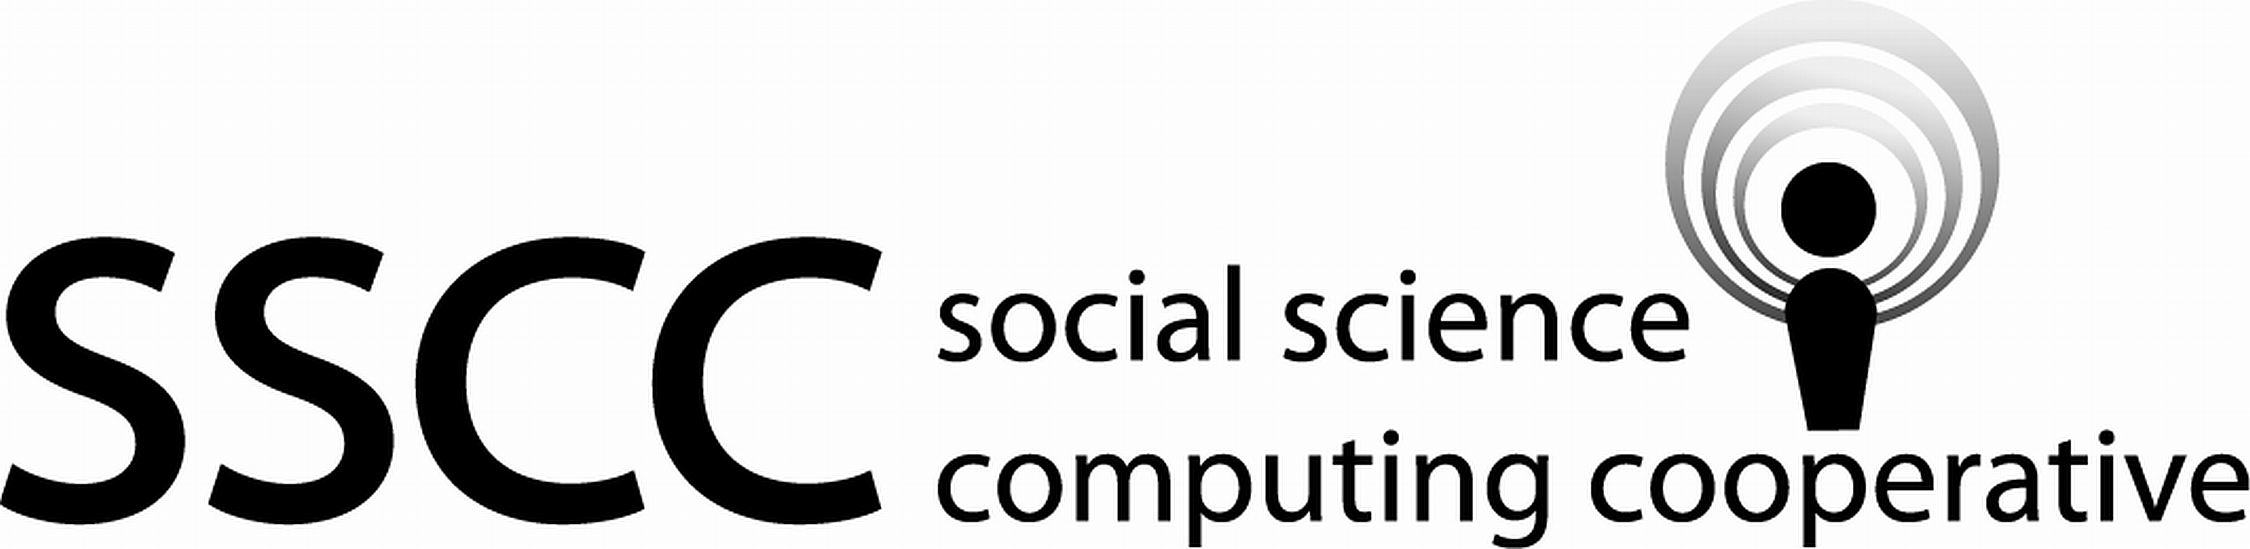 SSCC - Social Science Computing Cooperative